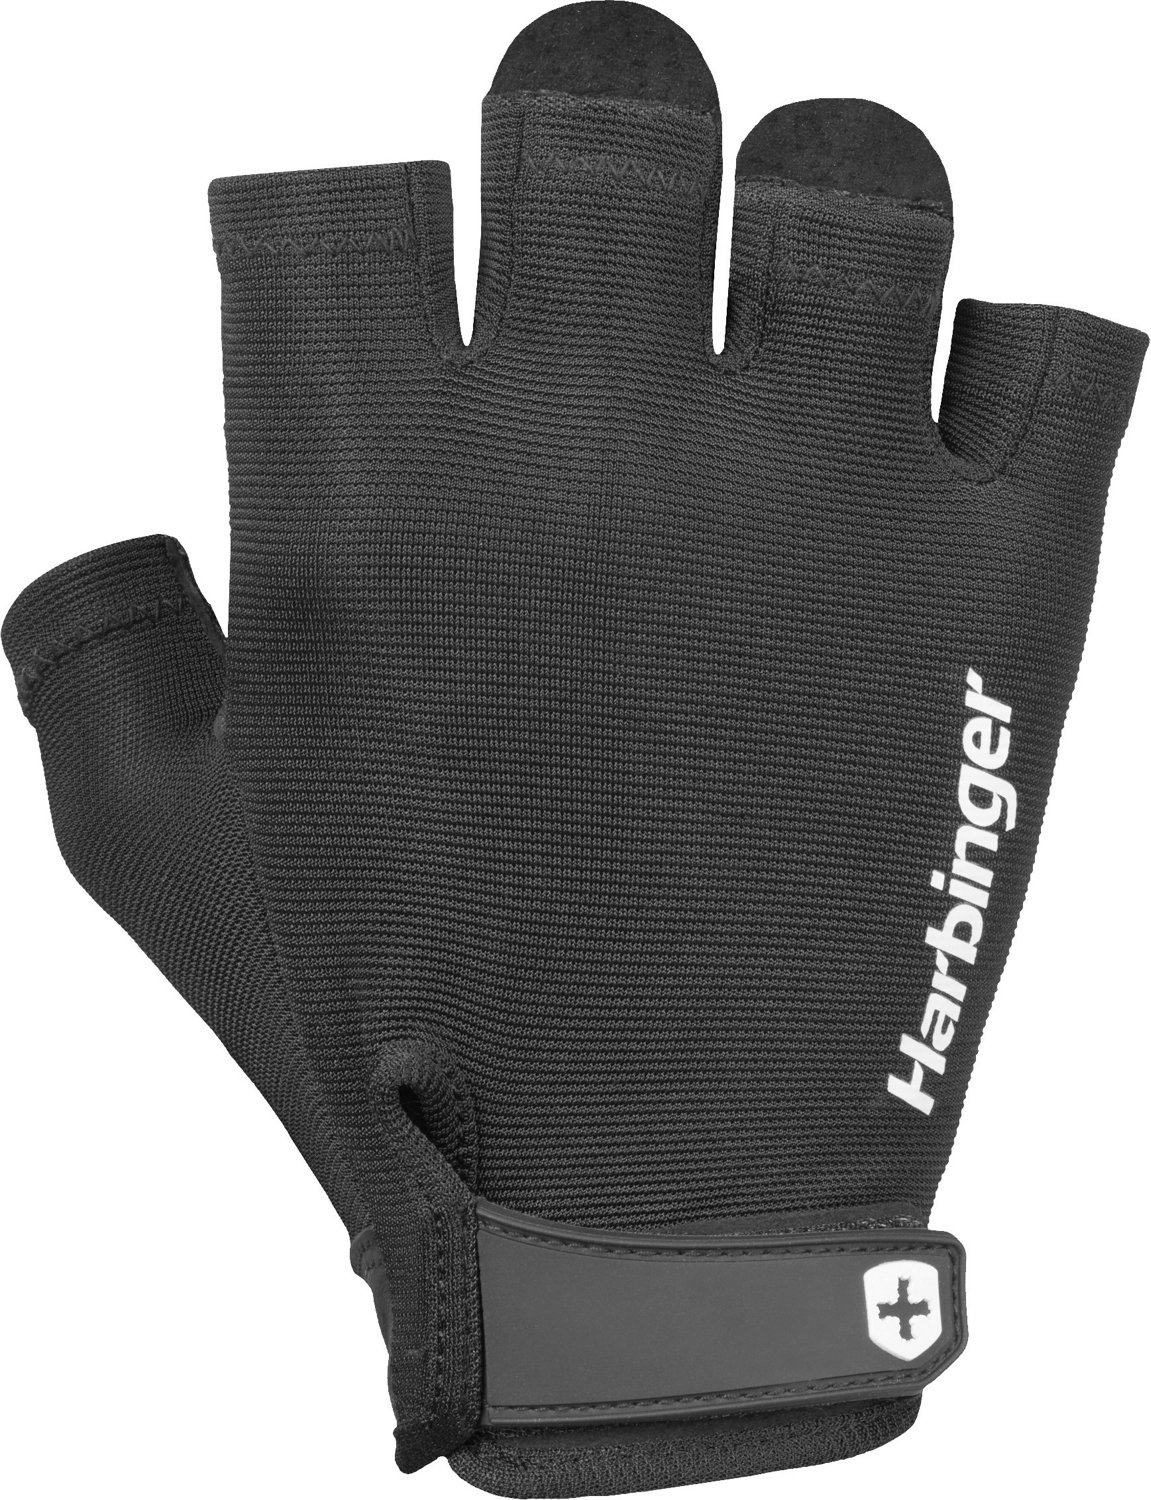 Weight Lifting & Workout Gloves